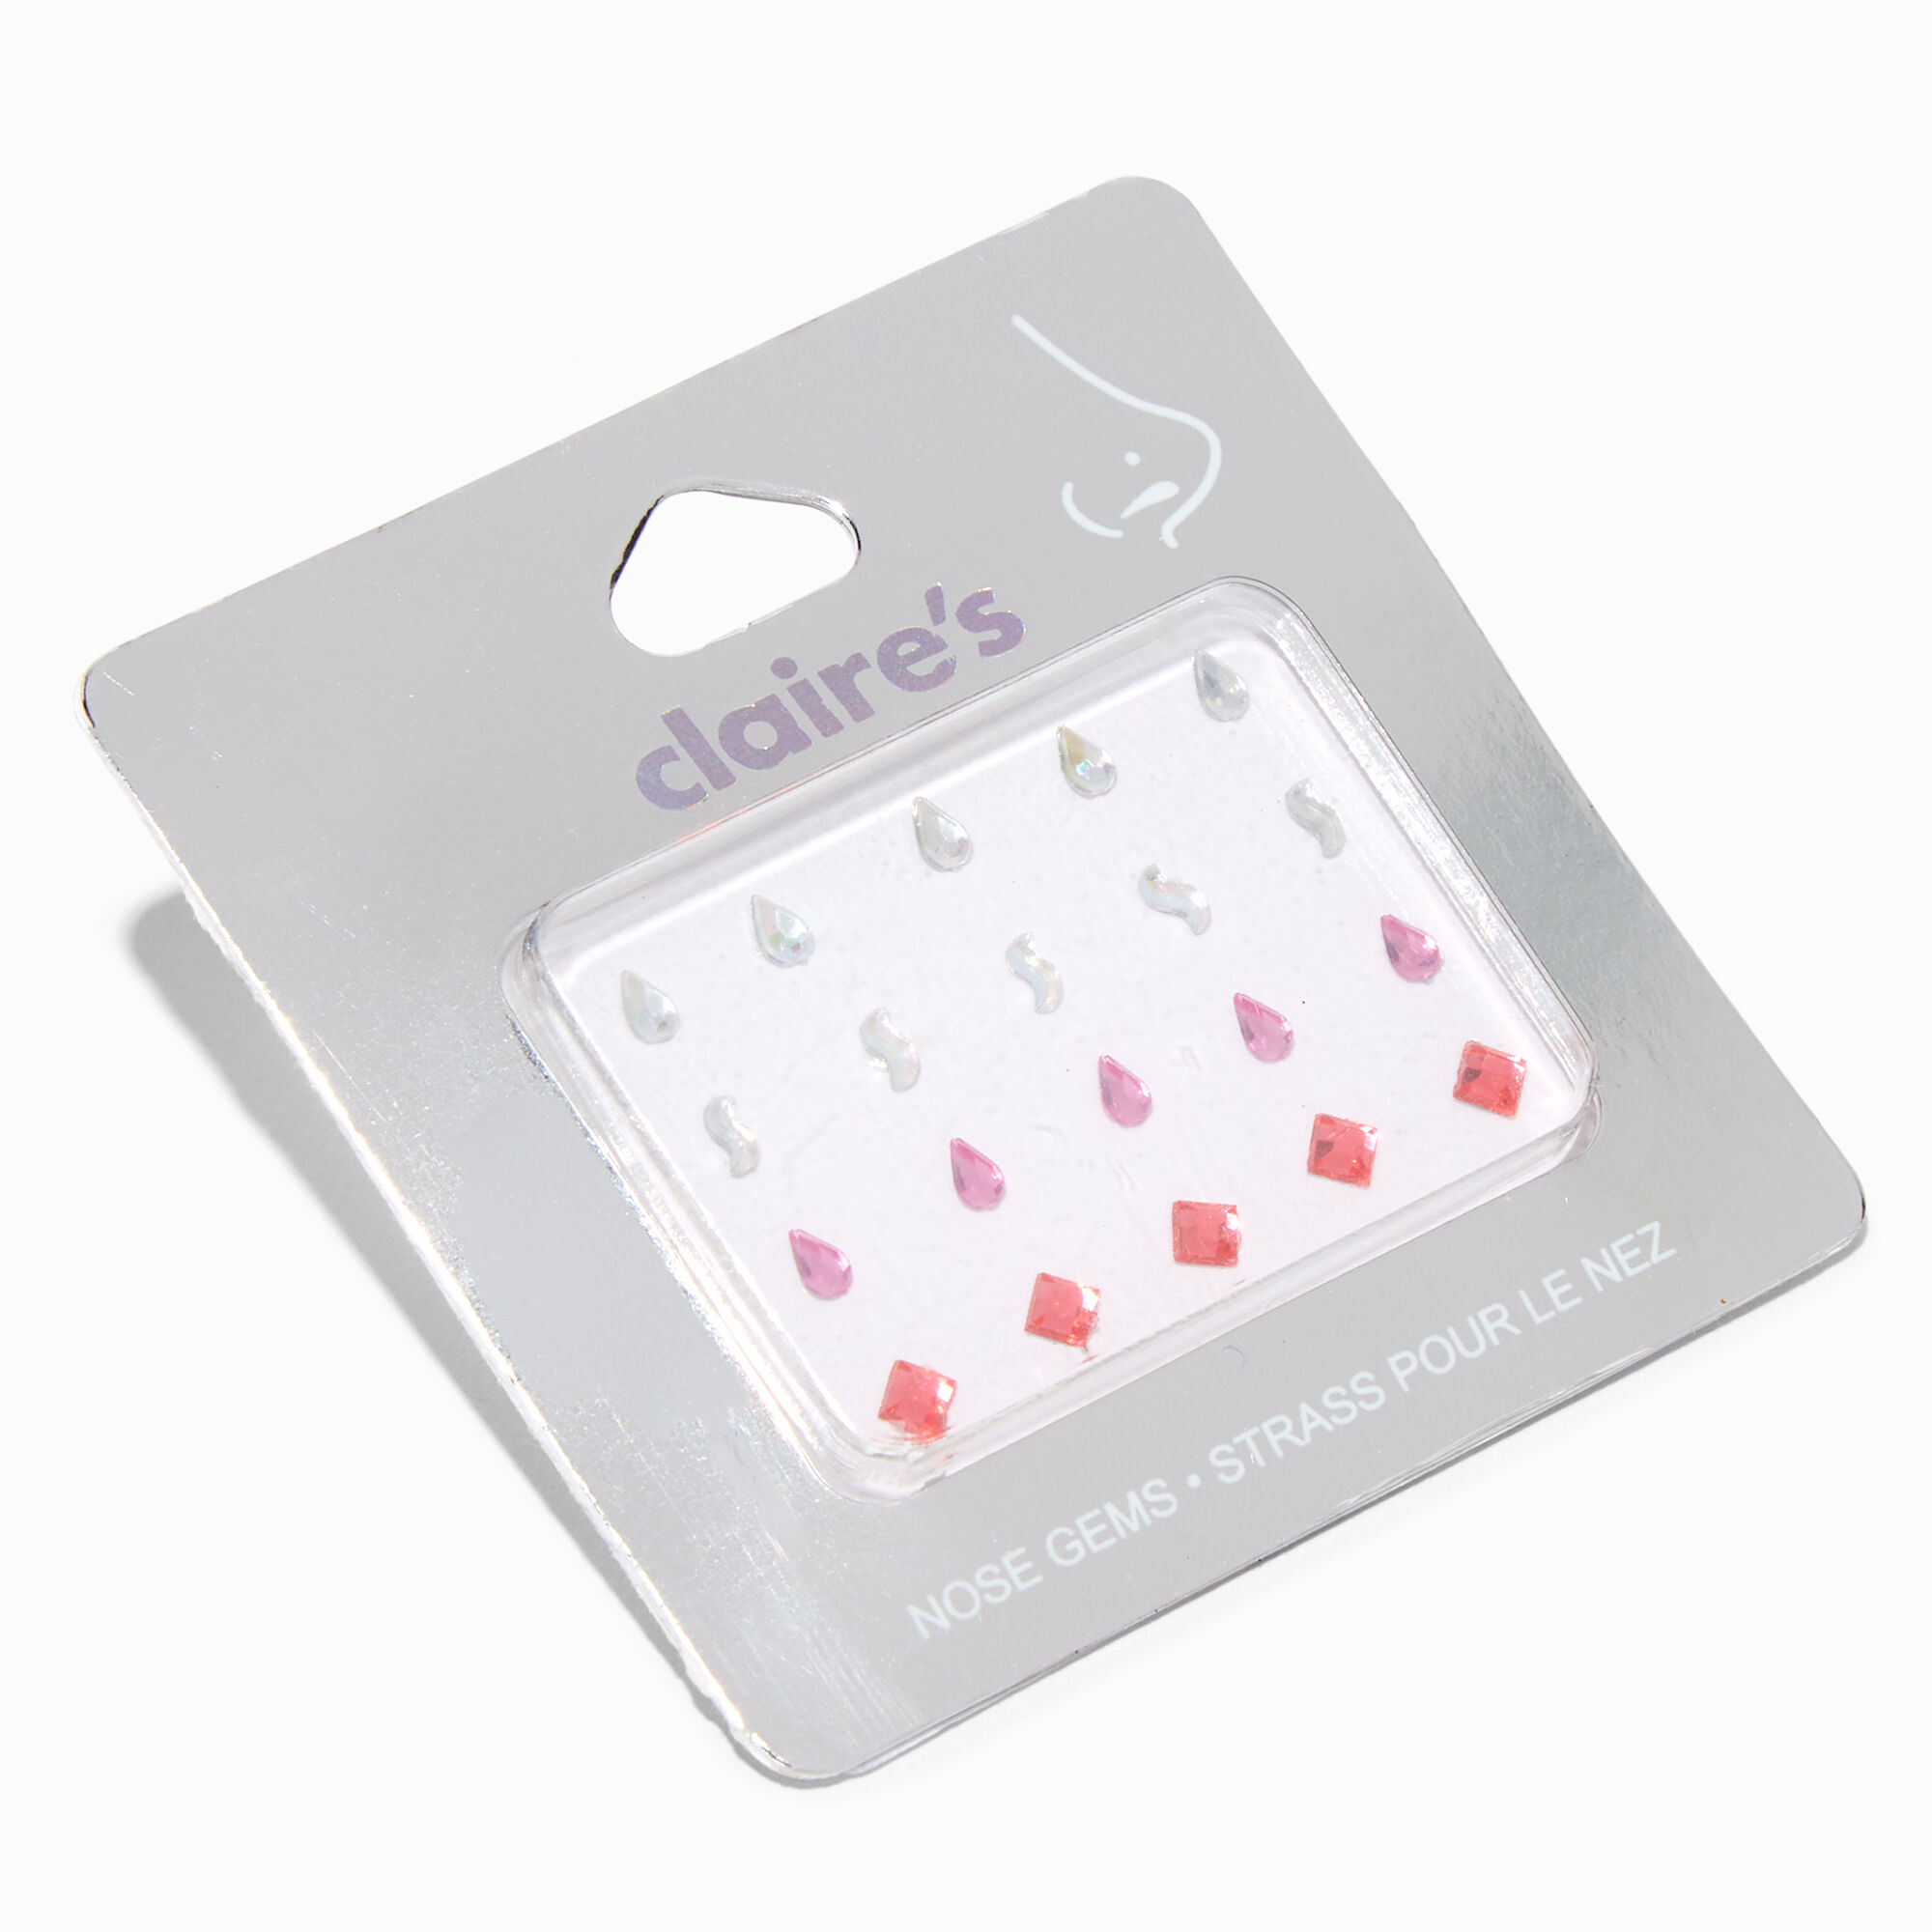 View Claires Diamond Nose Gems 20 Pack Pink information